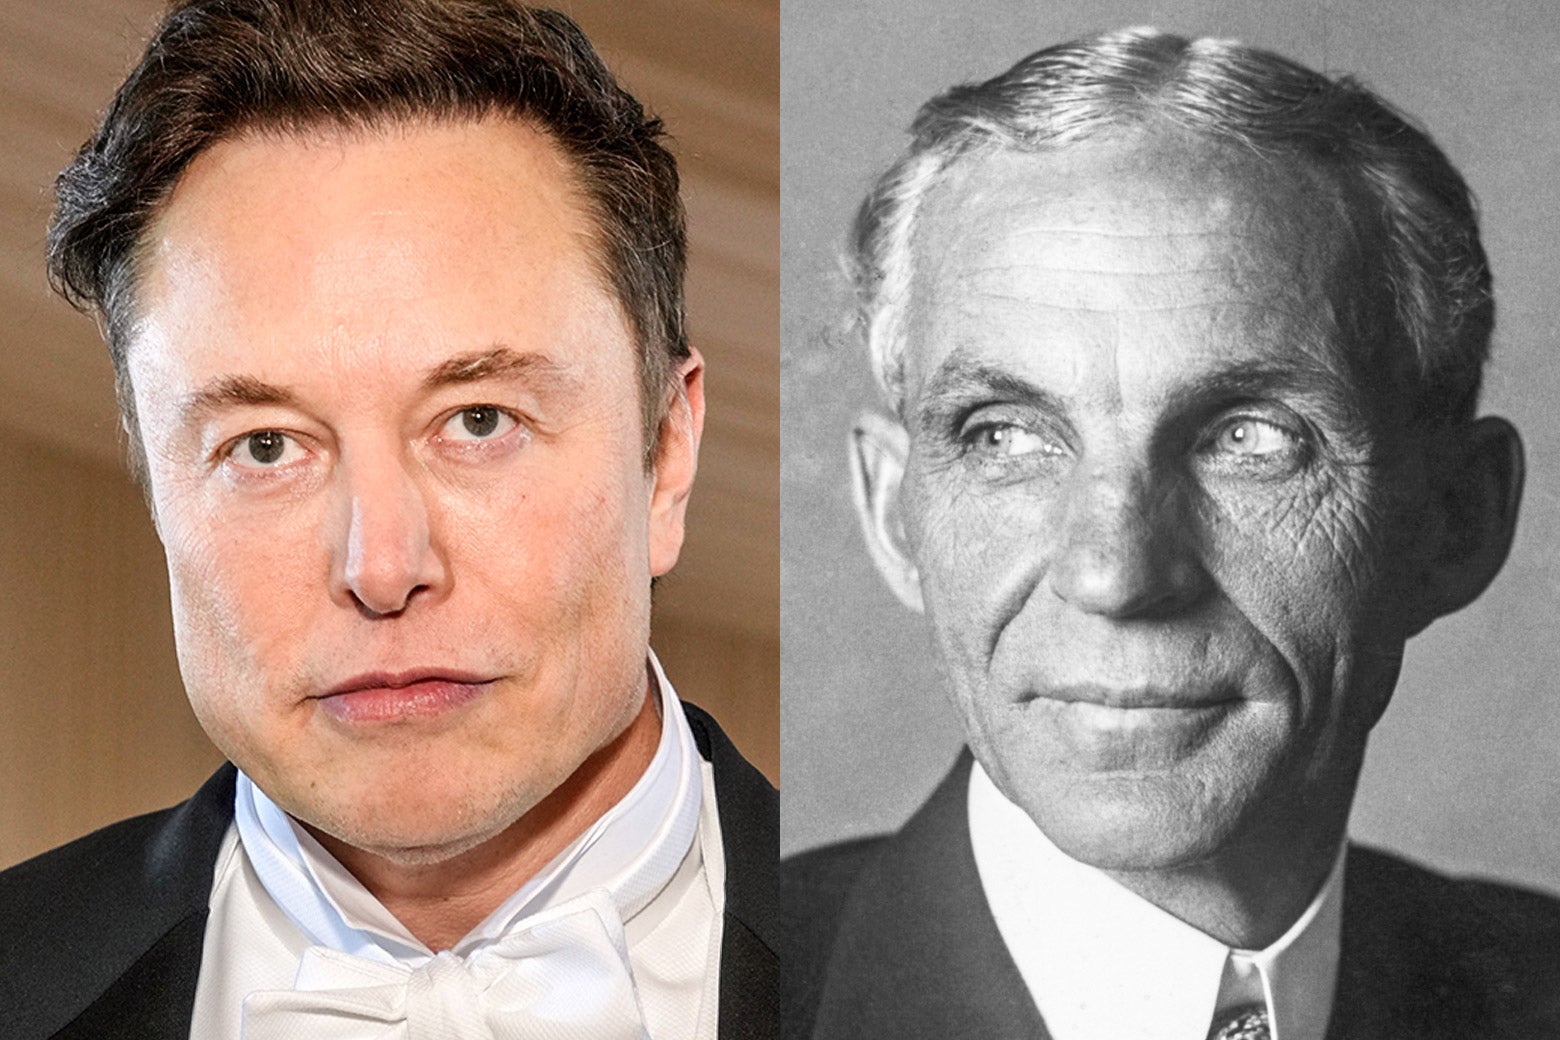 Photo portraits of Elon Musk, in a tuxedo, on the left and Henry Ford in a suit on the right.